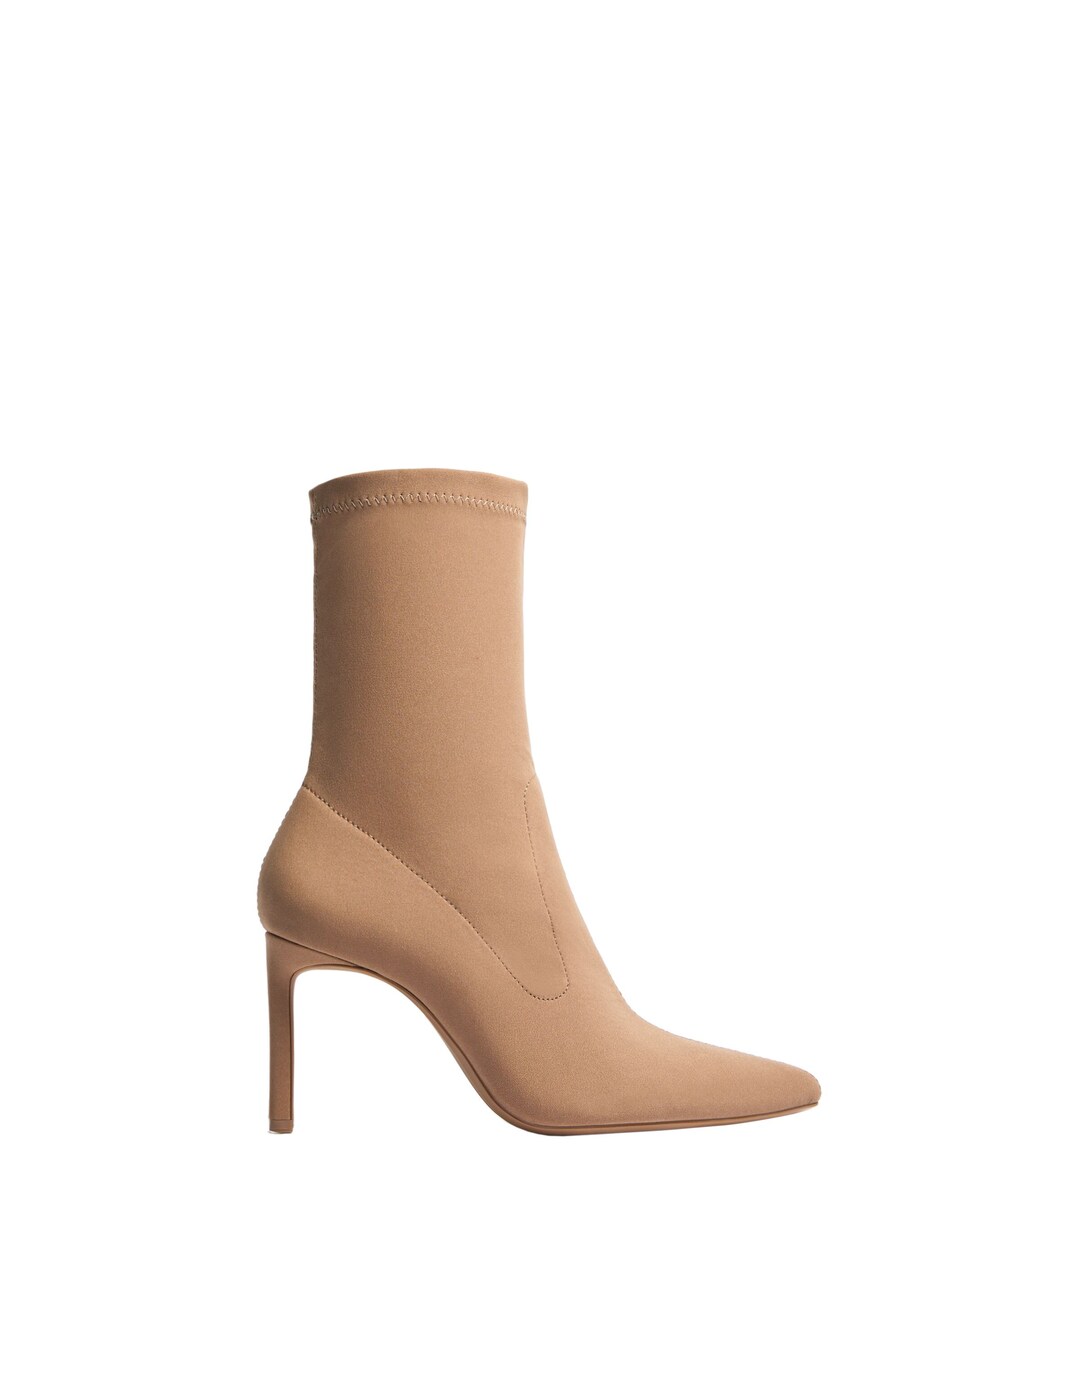 Tailored high-heel ankle boots